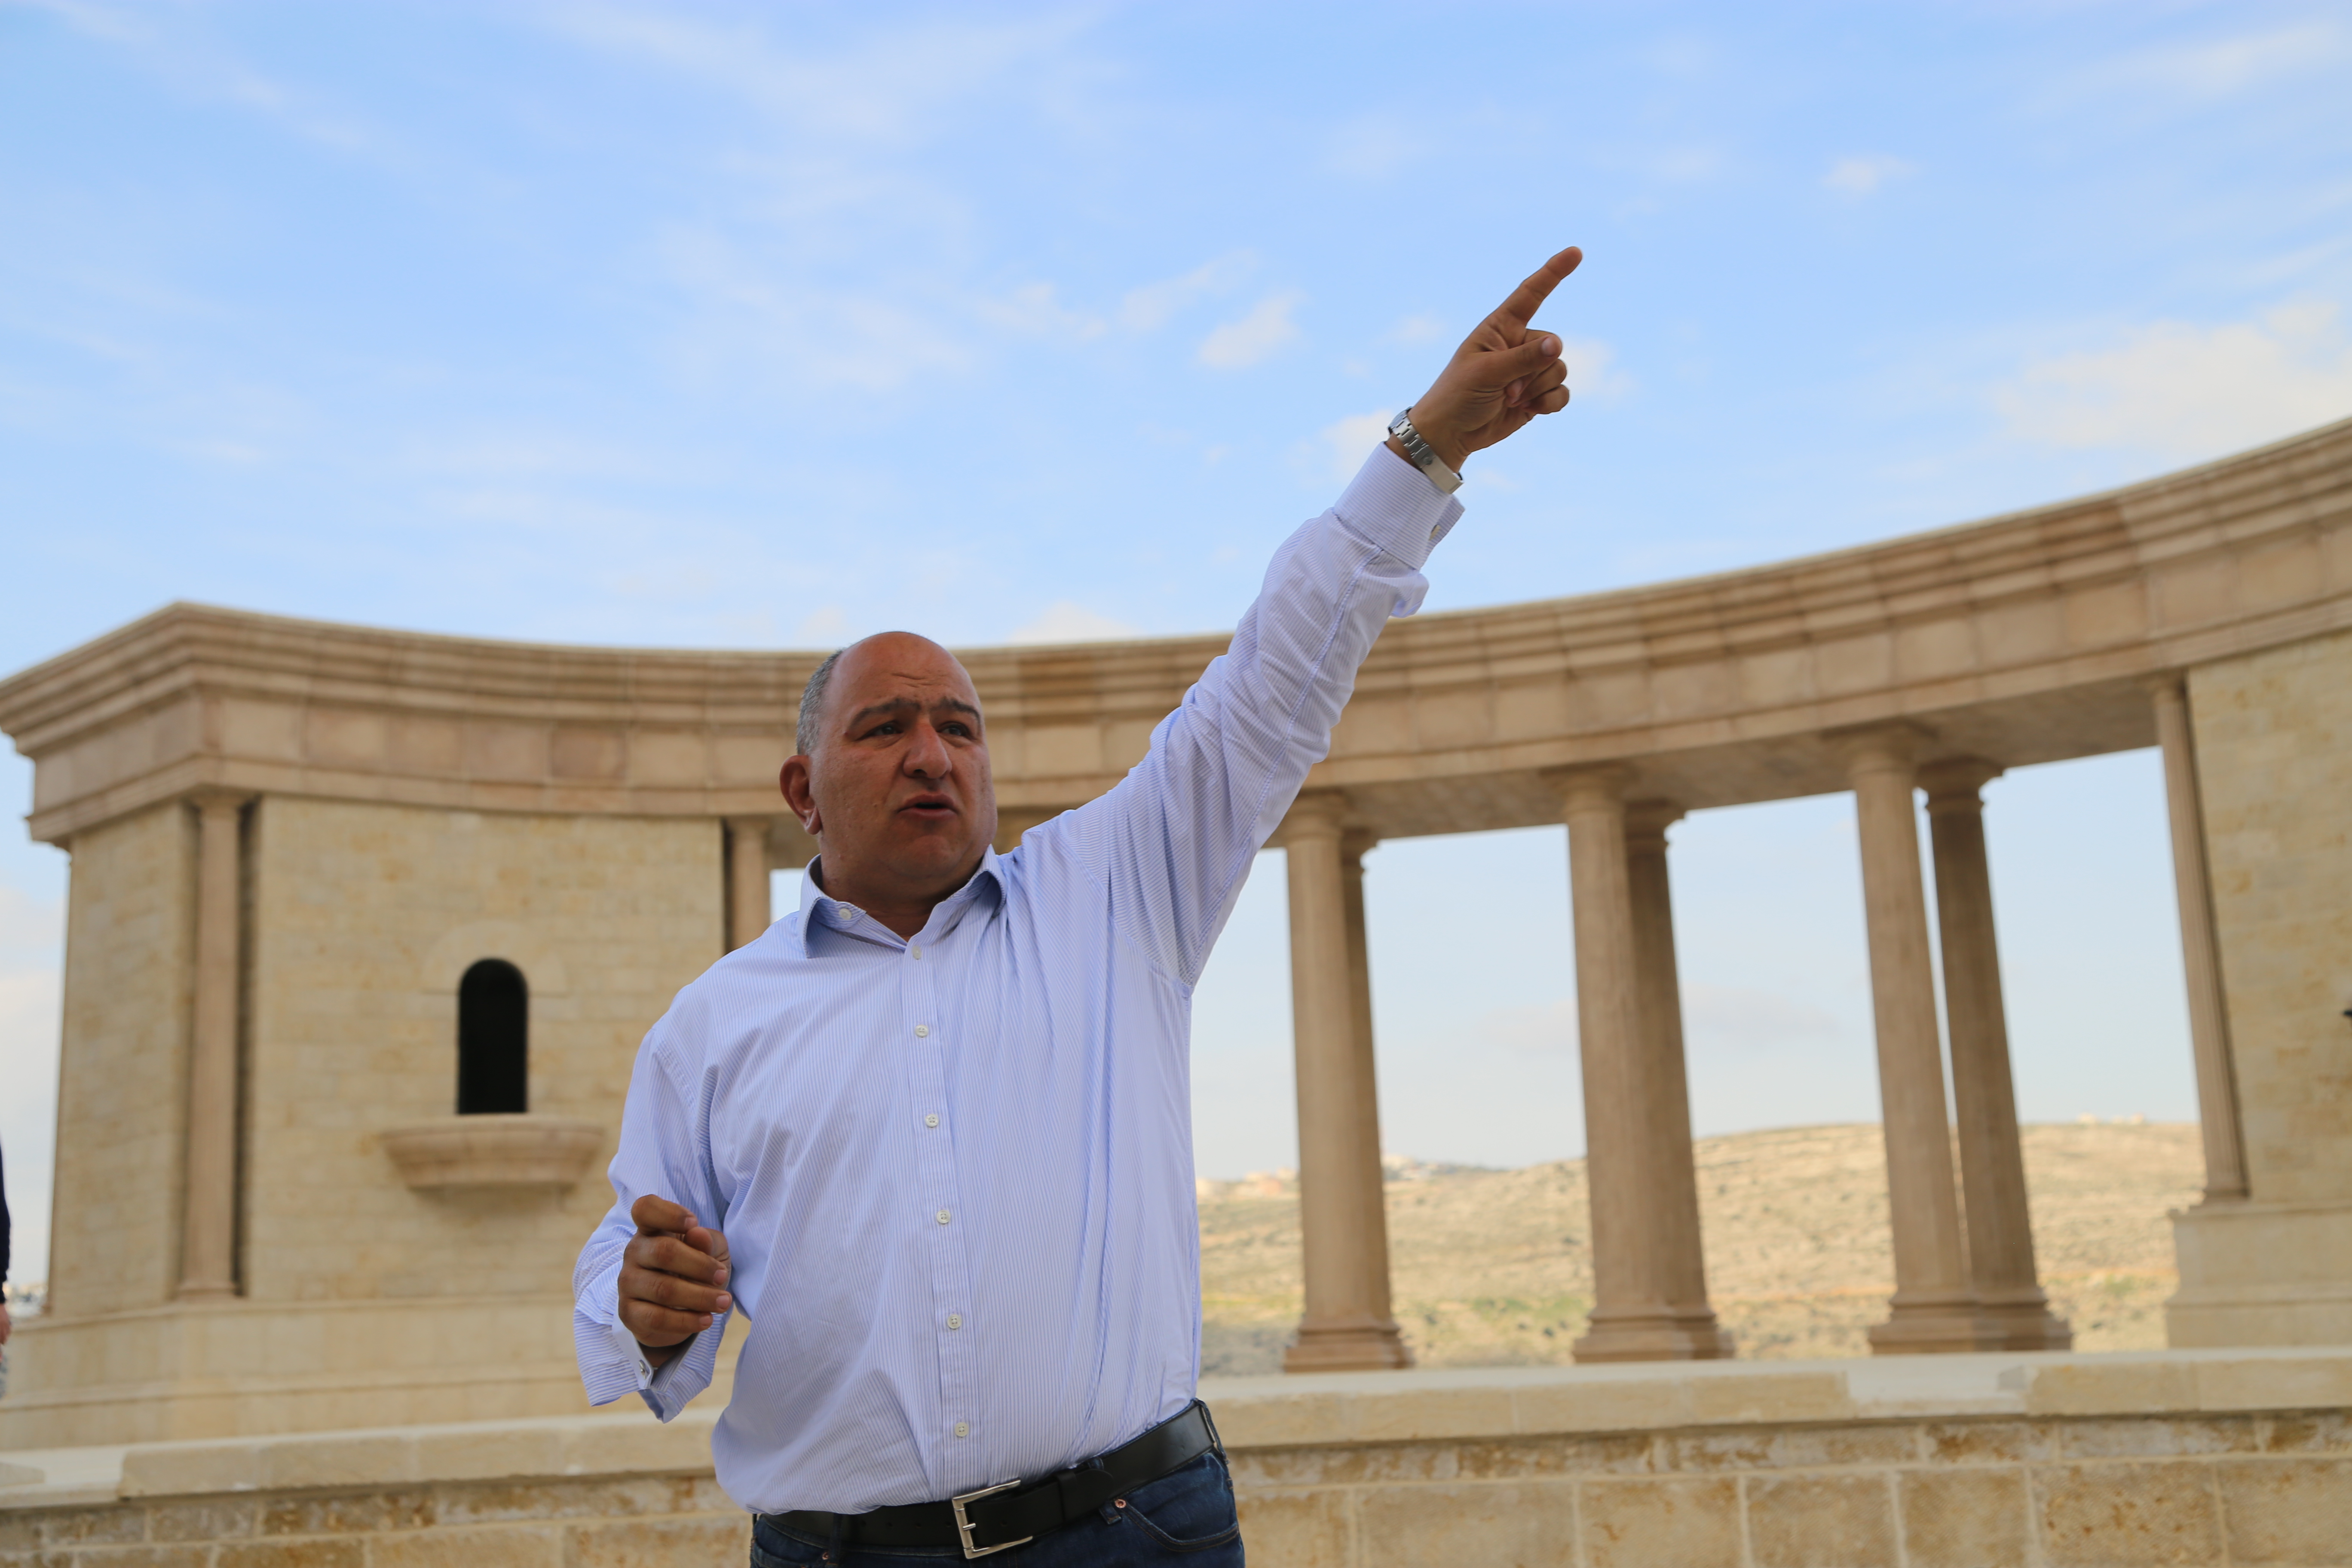 Developer Bashar al-Masri announced he would finally be able to connect the billion-dollar investment to the Israeli water grid, marking the final step.